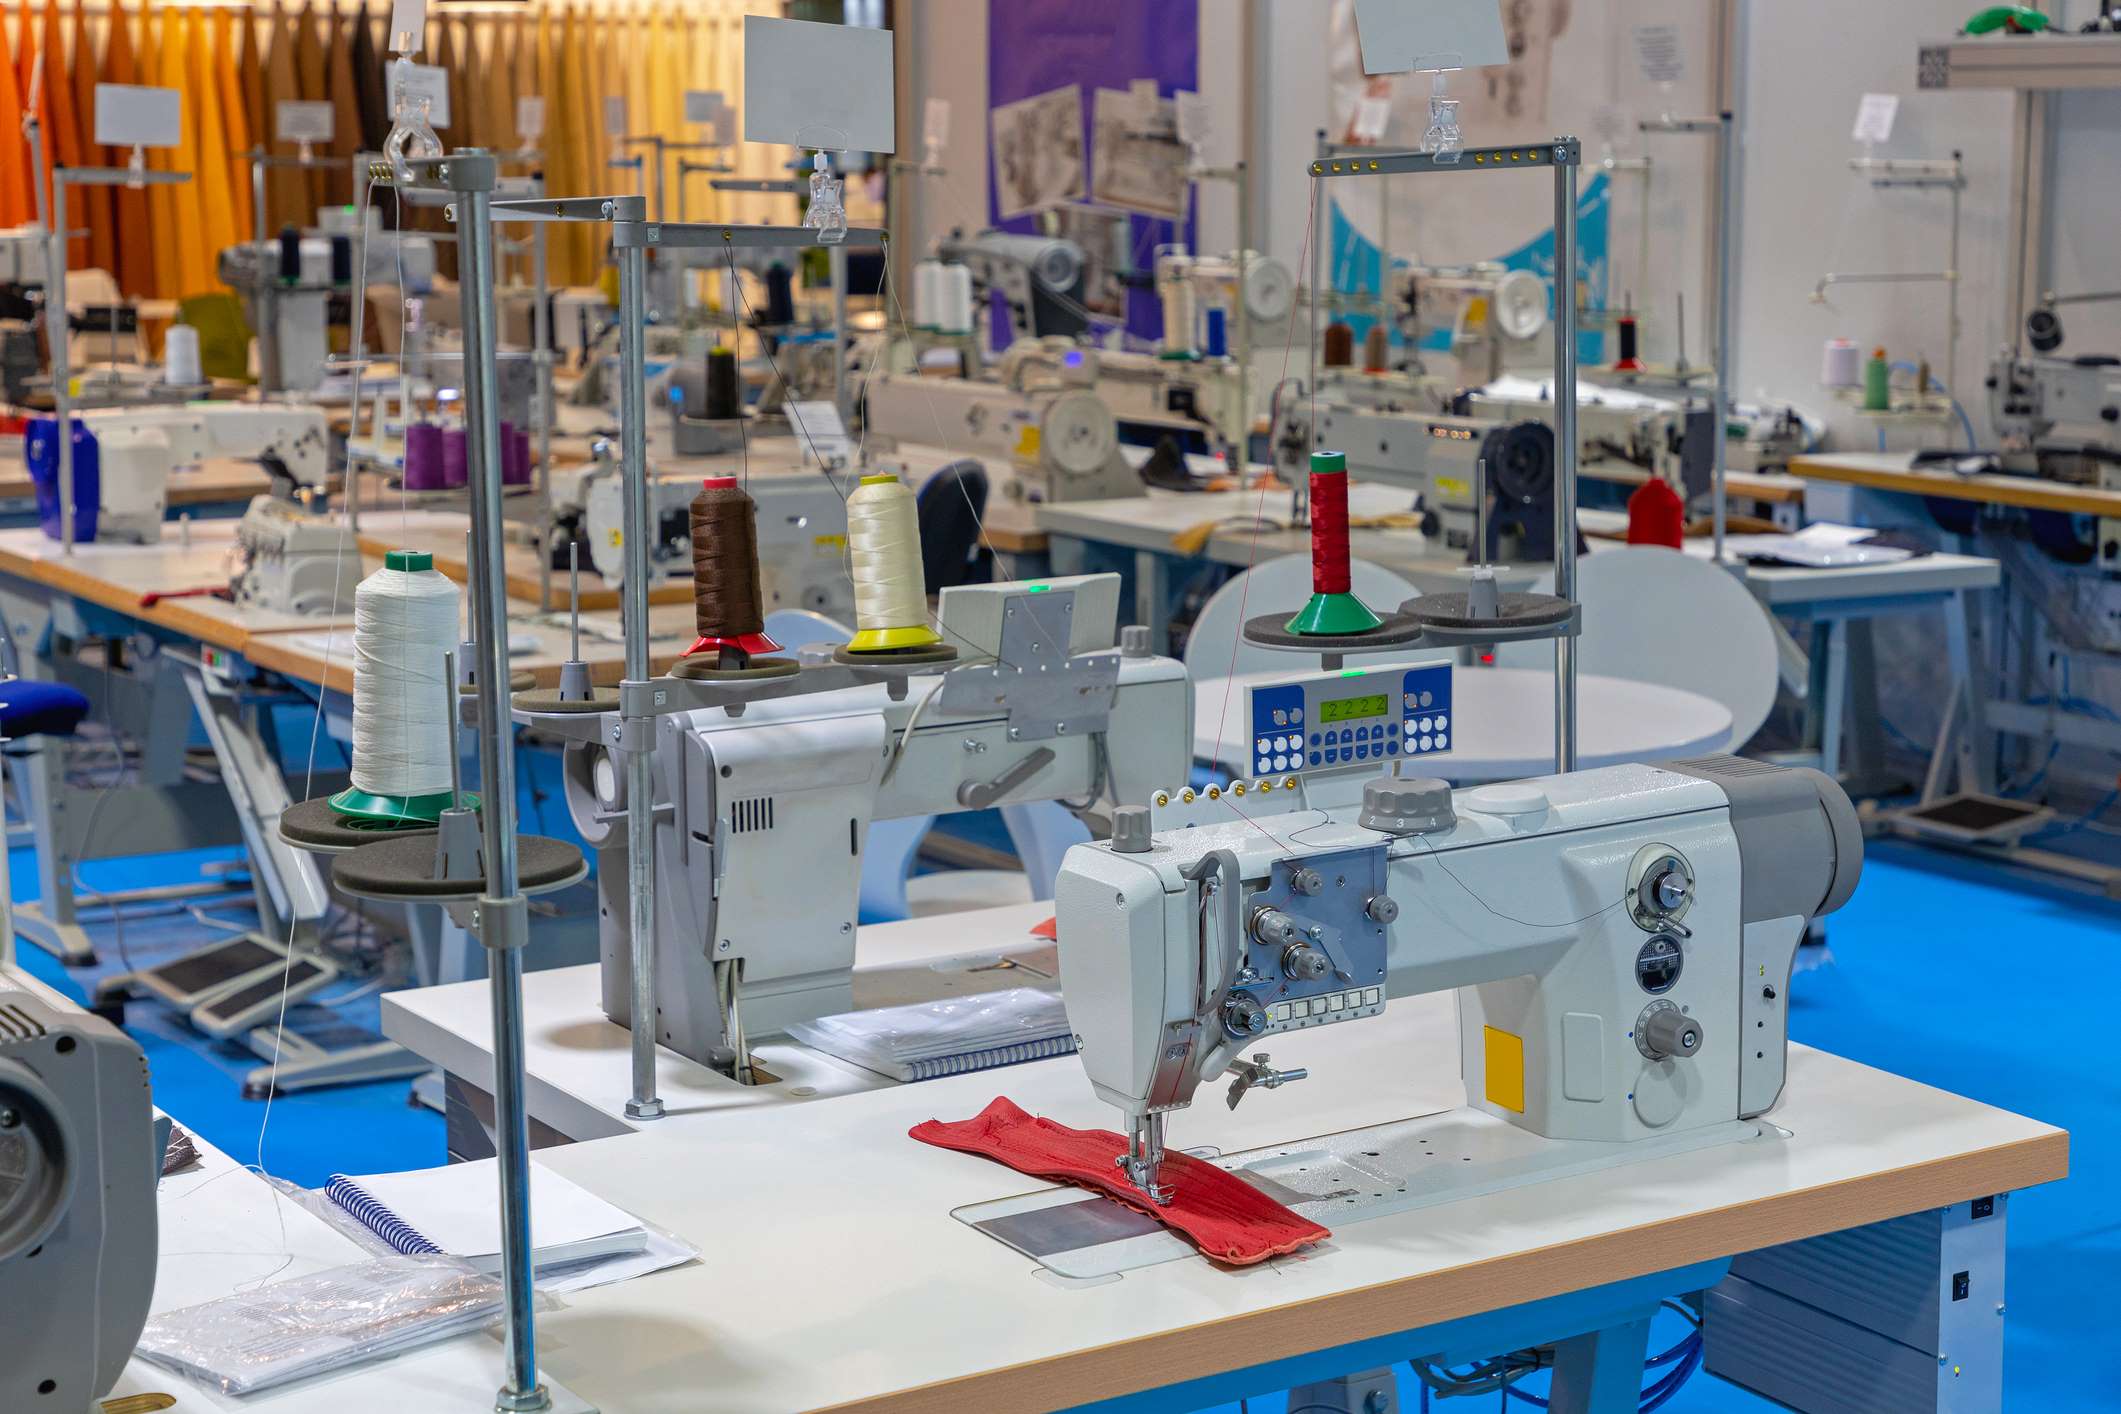 Commercial & Domestic Sewing Machine Sales, Rentals & Repairs In Leigh & Lancashire